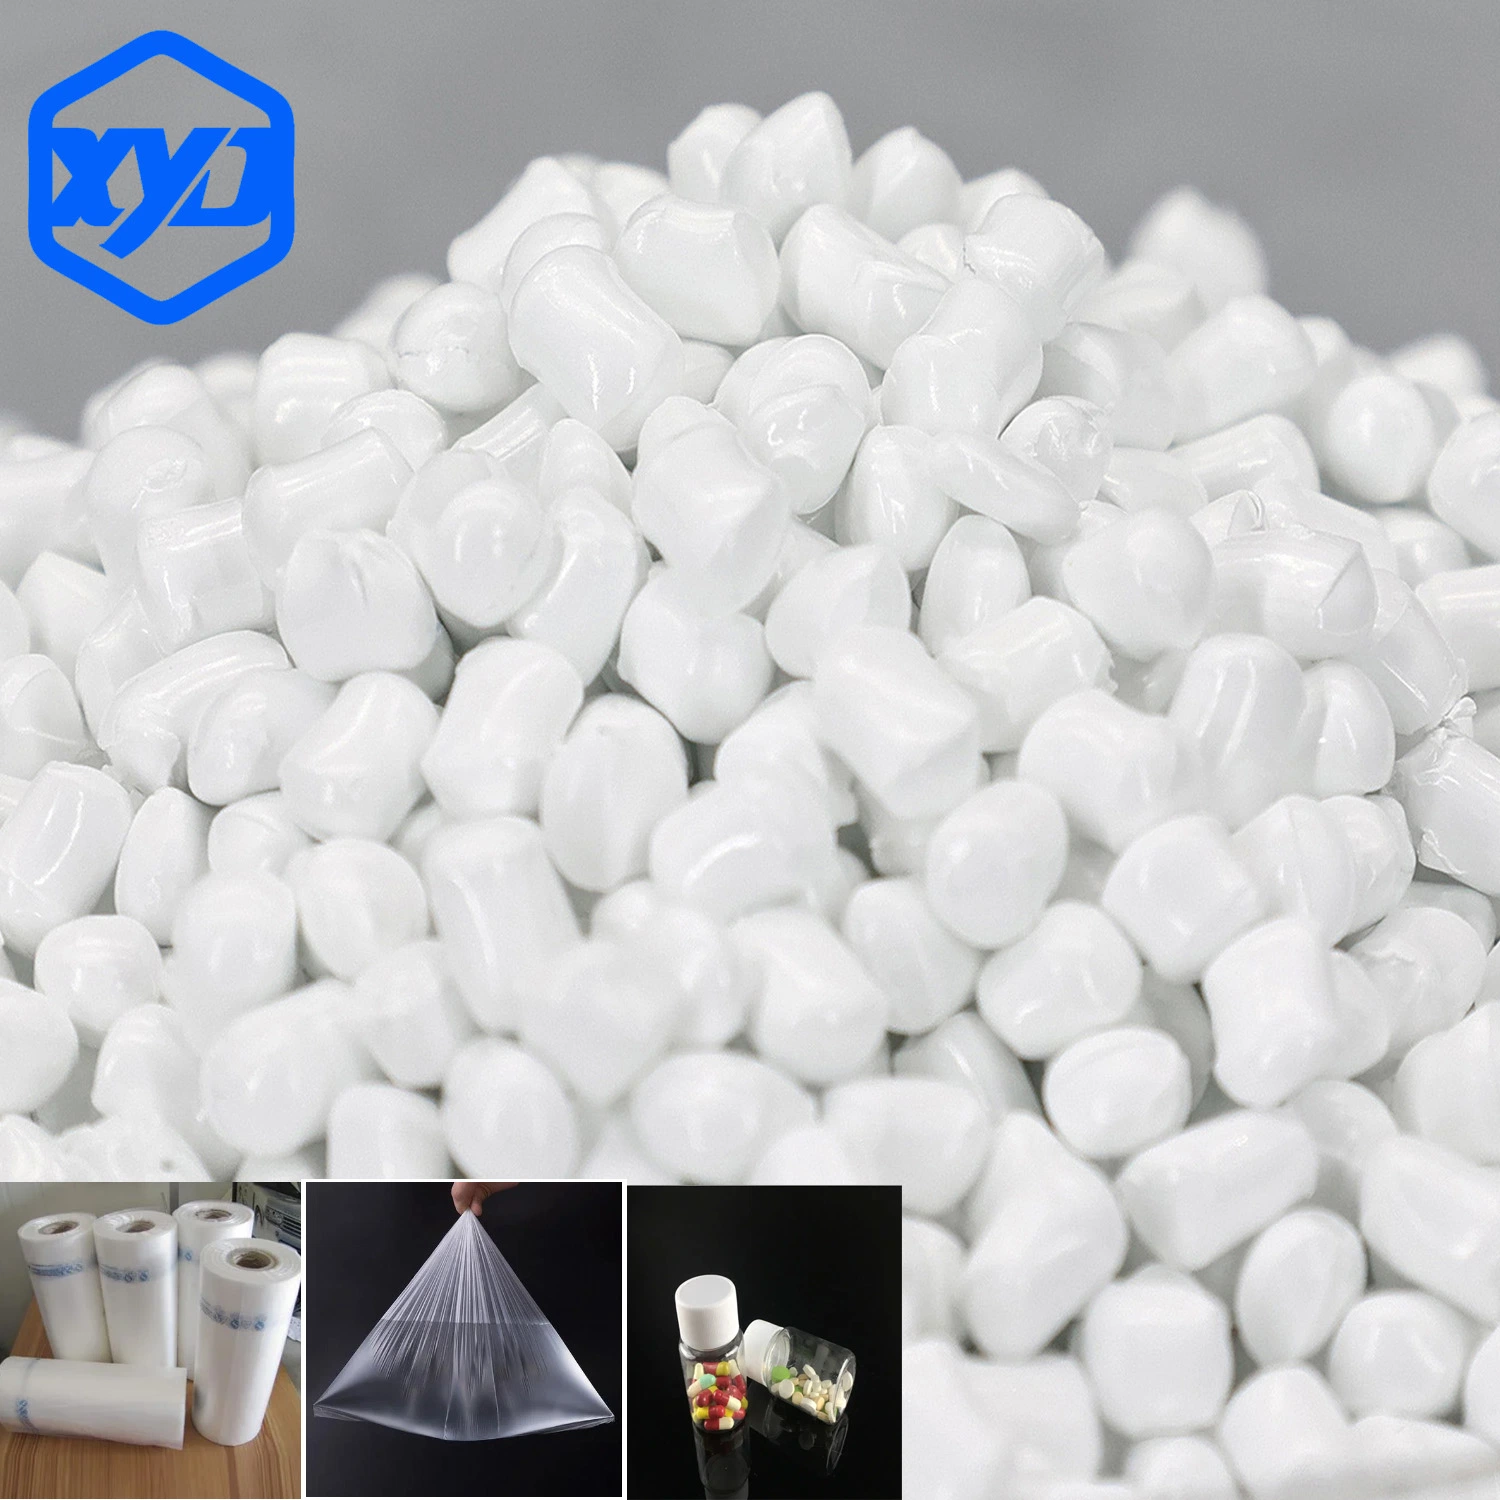 High quality/High cost performance PP/PE/ABS/PVC Plastic Raw Material White Masterbatch